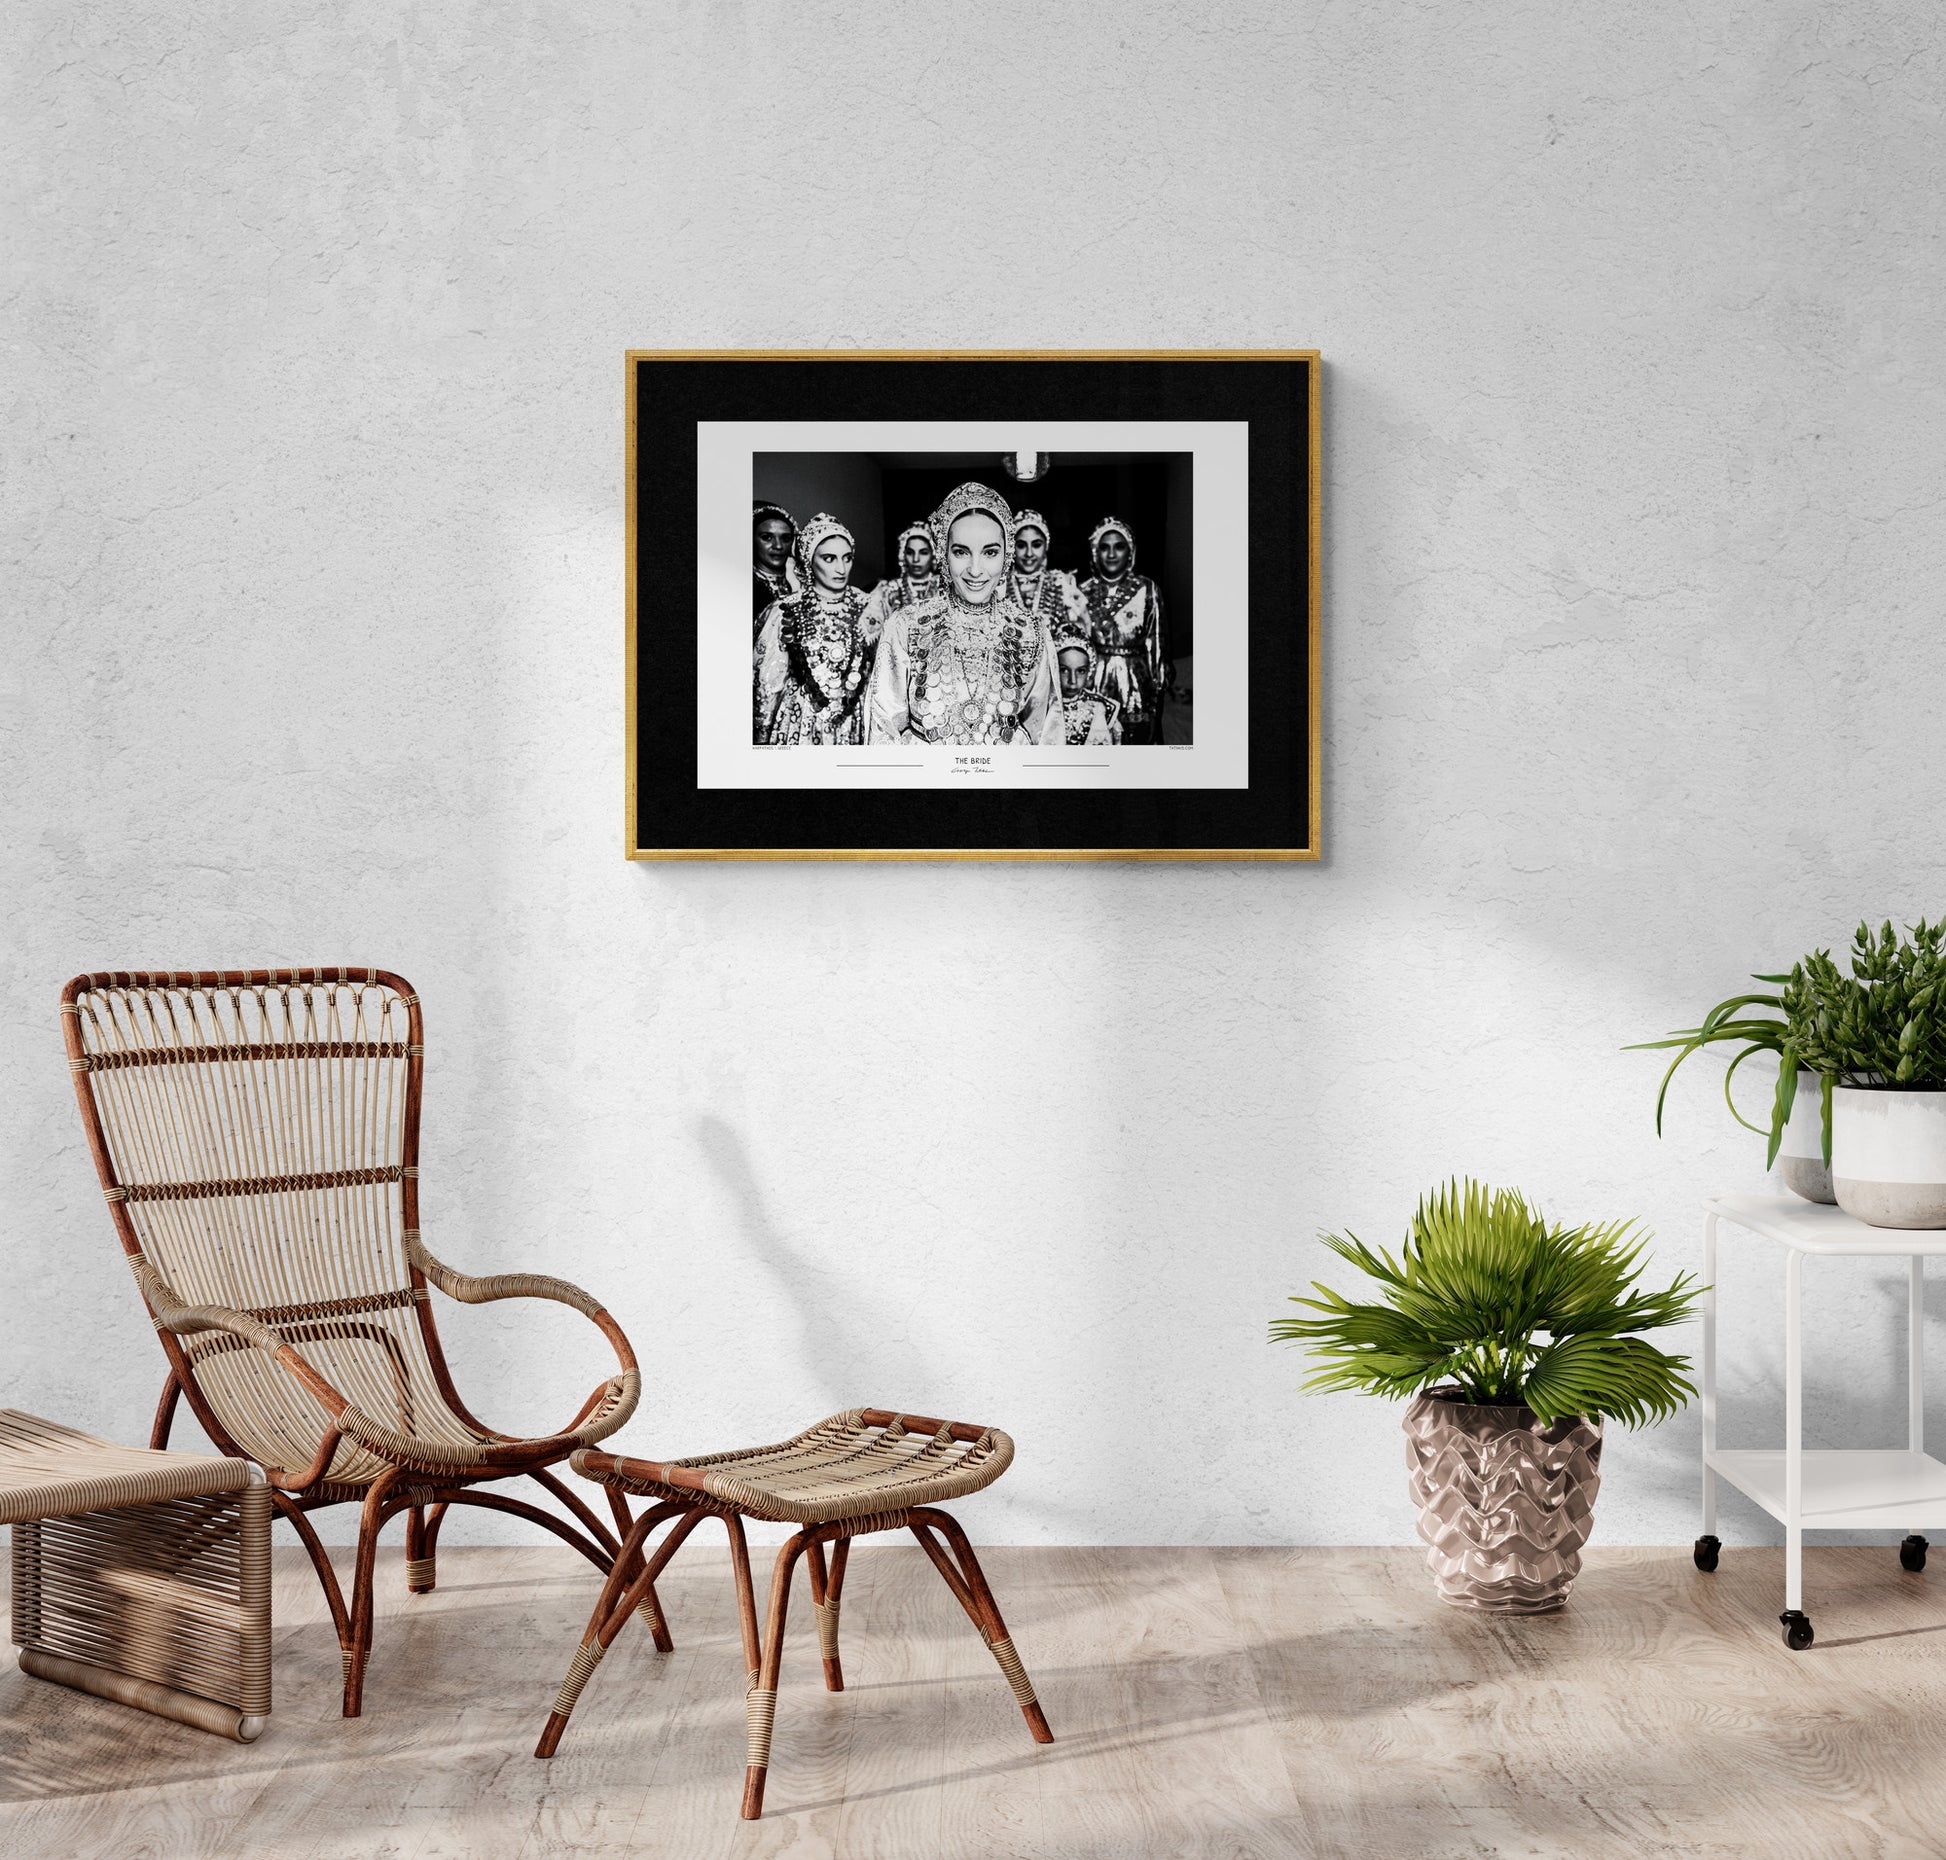 Black and White Photo Wall Art Poster from Greece | Bride in Diafani on Karpathos island, by George Tatakis - room with cane armchair